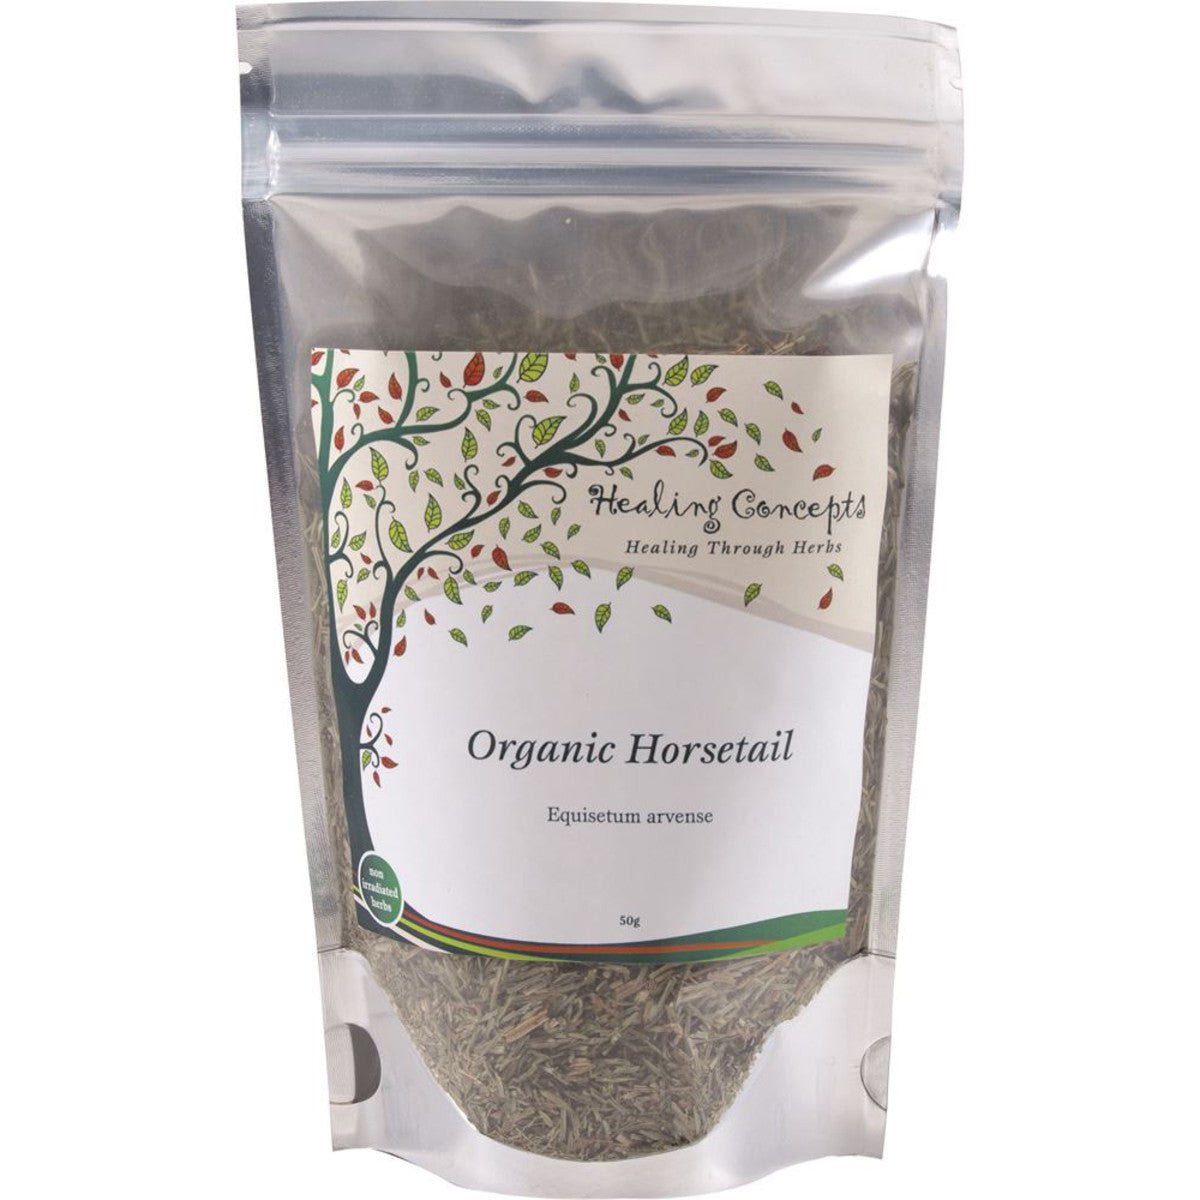 HEALING CONCEPTS Organic Horsetail 50g - Dr Earth - Drinks